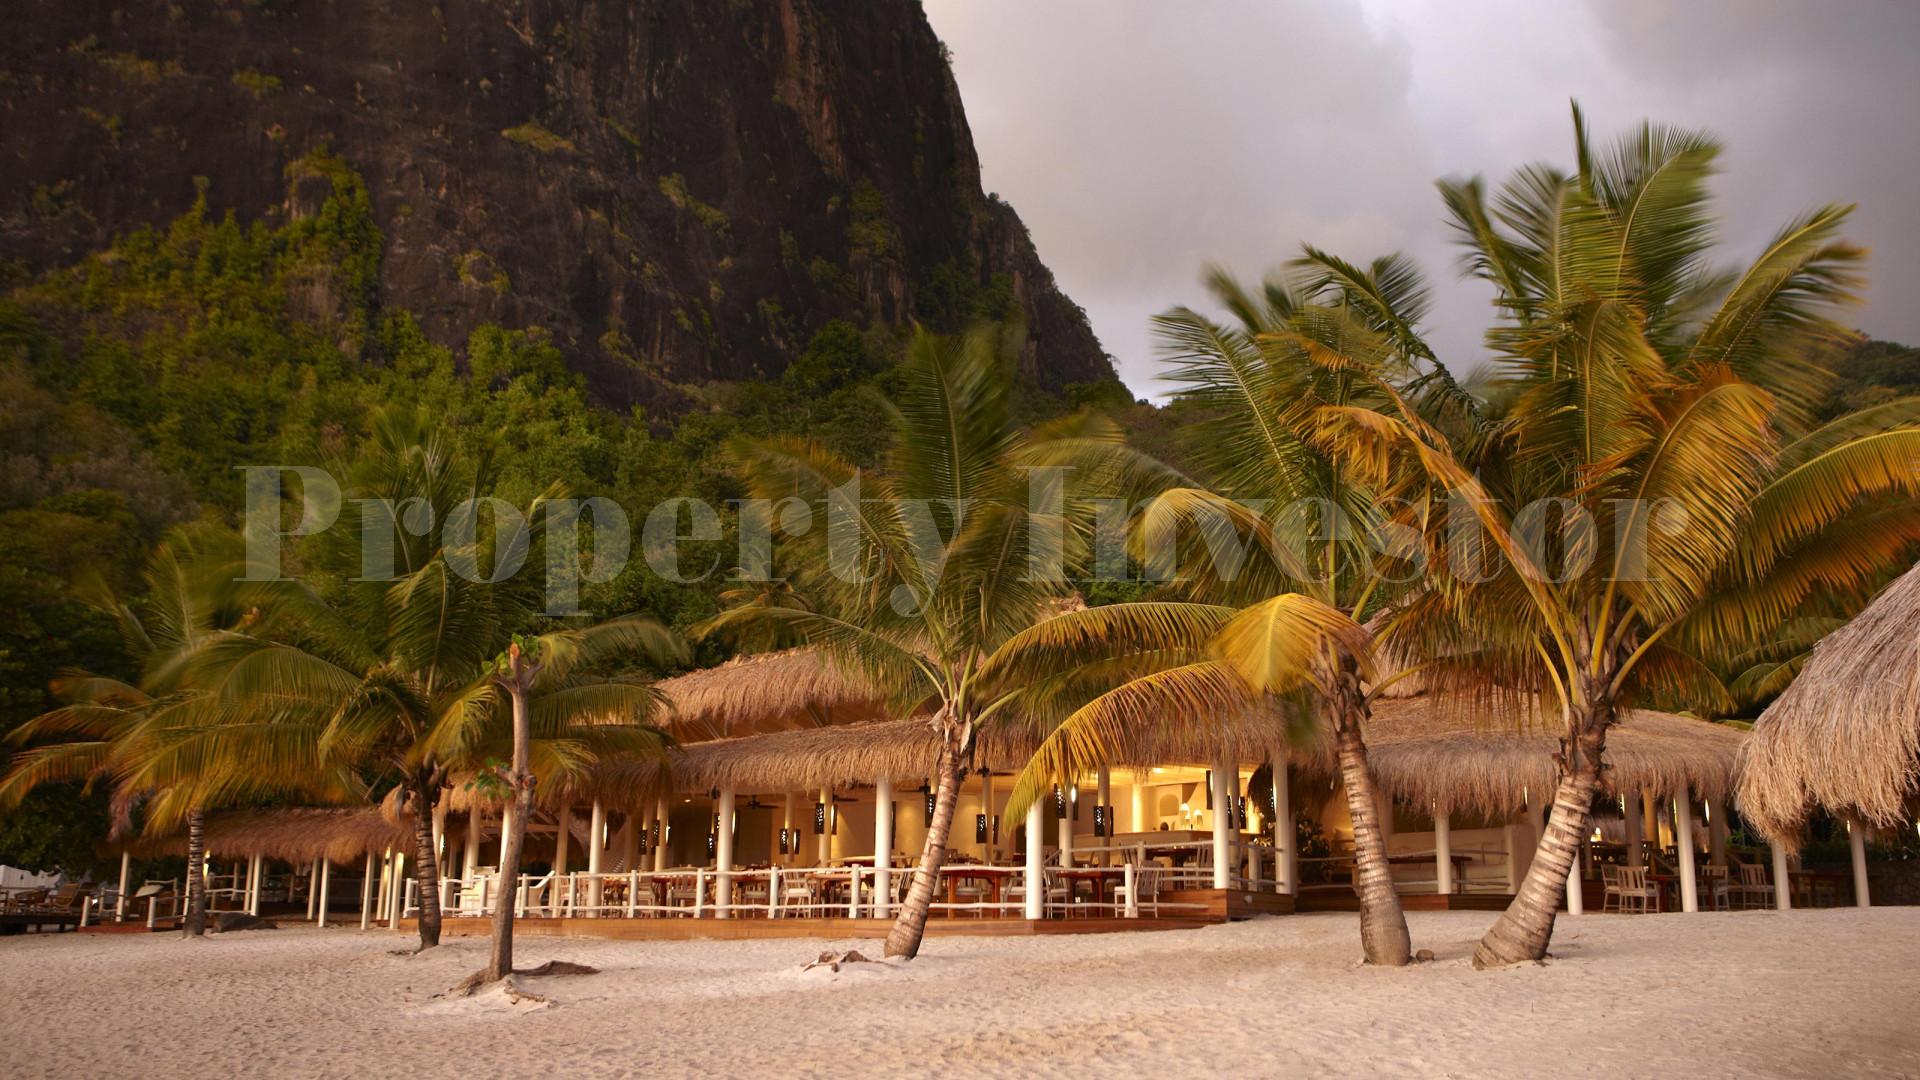 Ultra-Exclusive 5 Bedroom Luxury Beachfront Residence in Saint Lucia